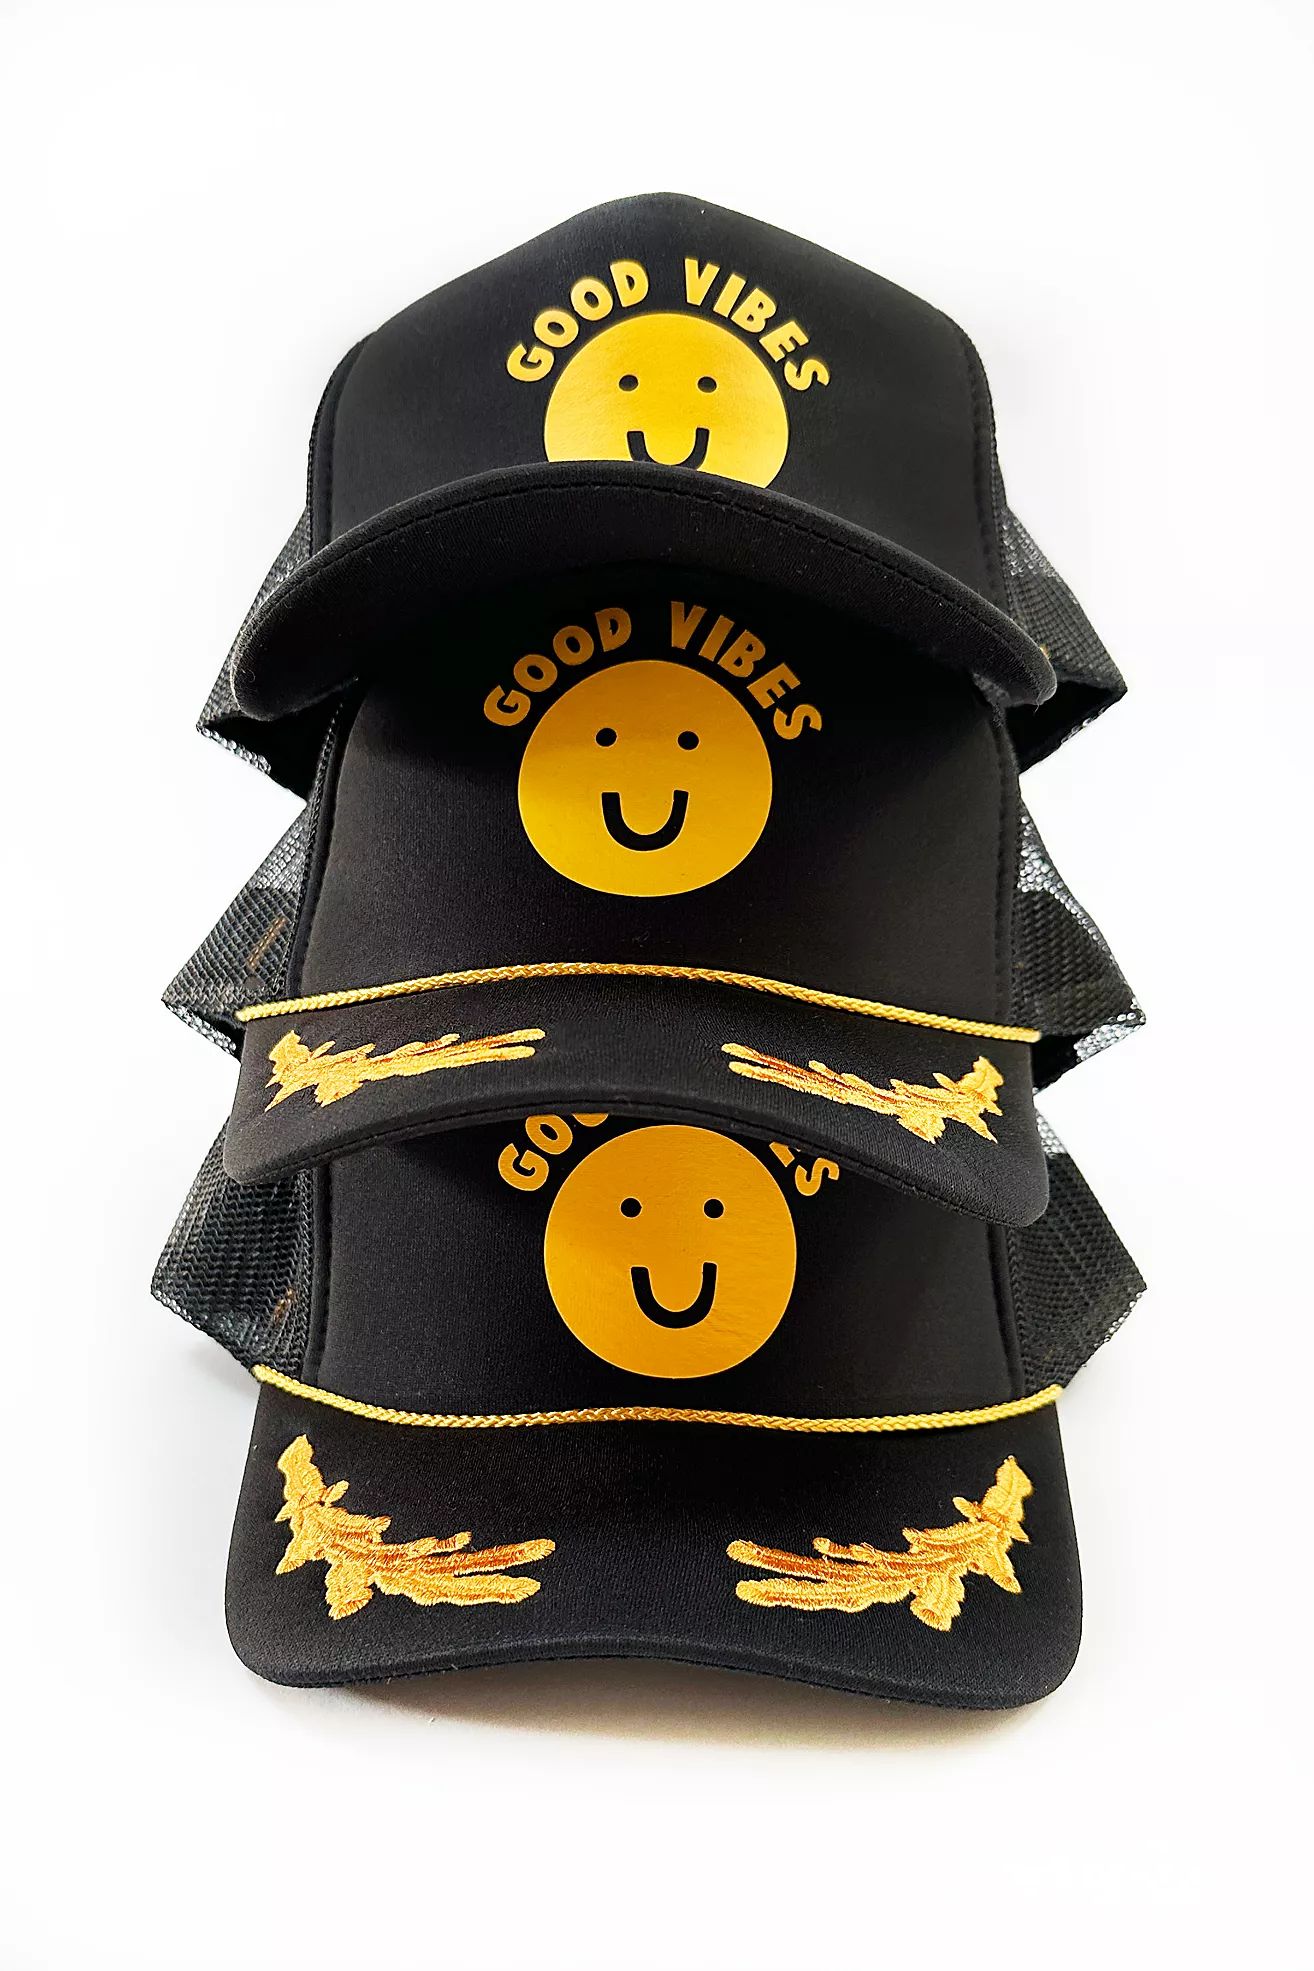 Hatch General Store Good Vibes Smiley Trucker Hat | Free People (Global - UK&FR Excluded)